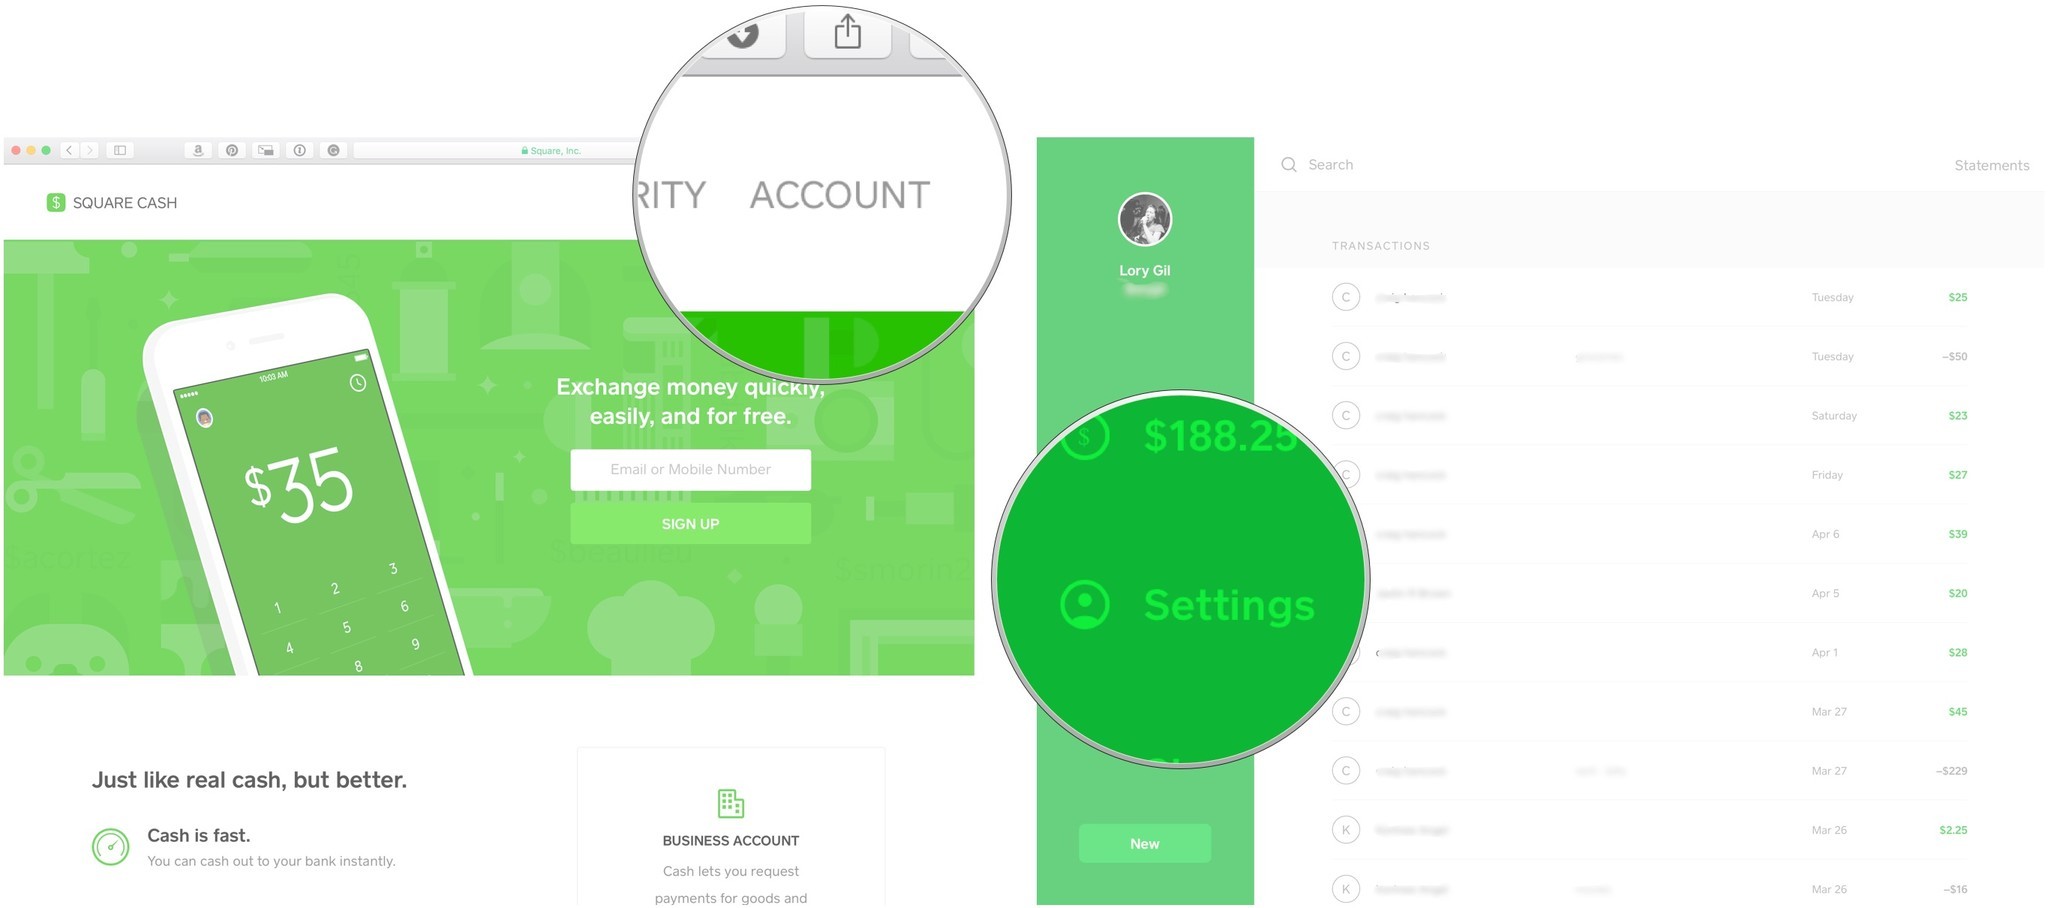 15 Top Pictures How To Close Cash App Account / How to automatically 'cash out' with the Square Cash app ...